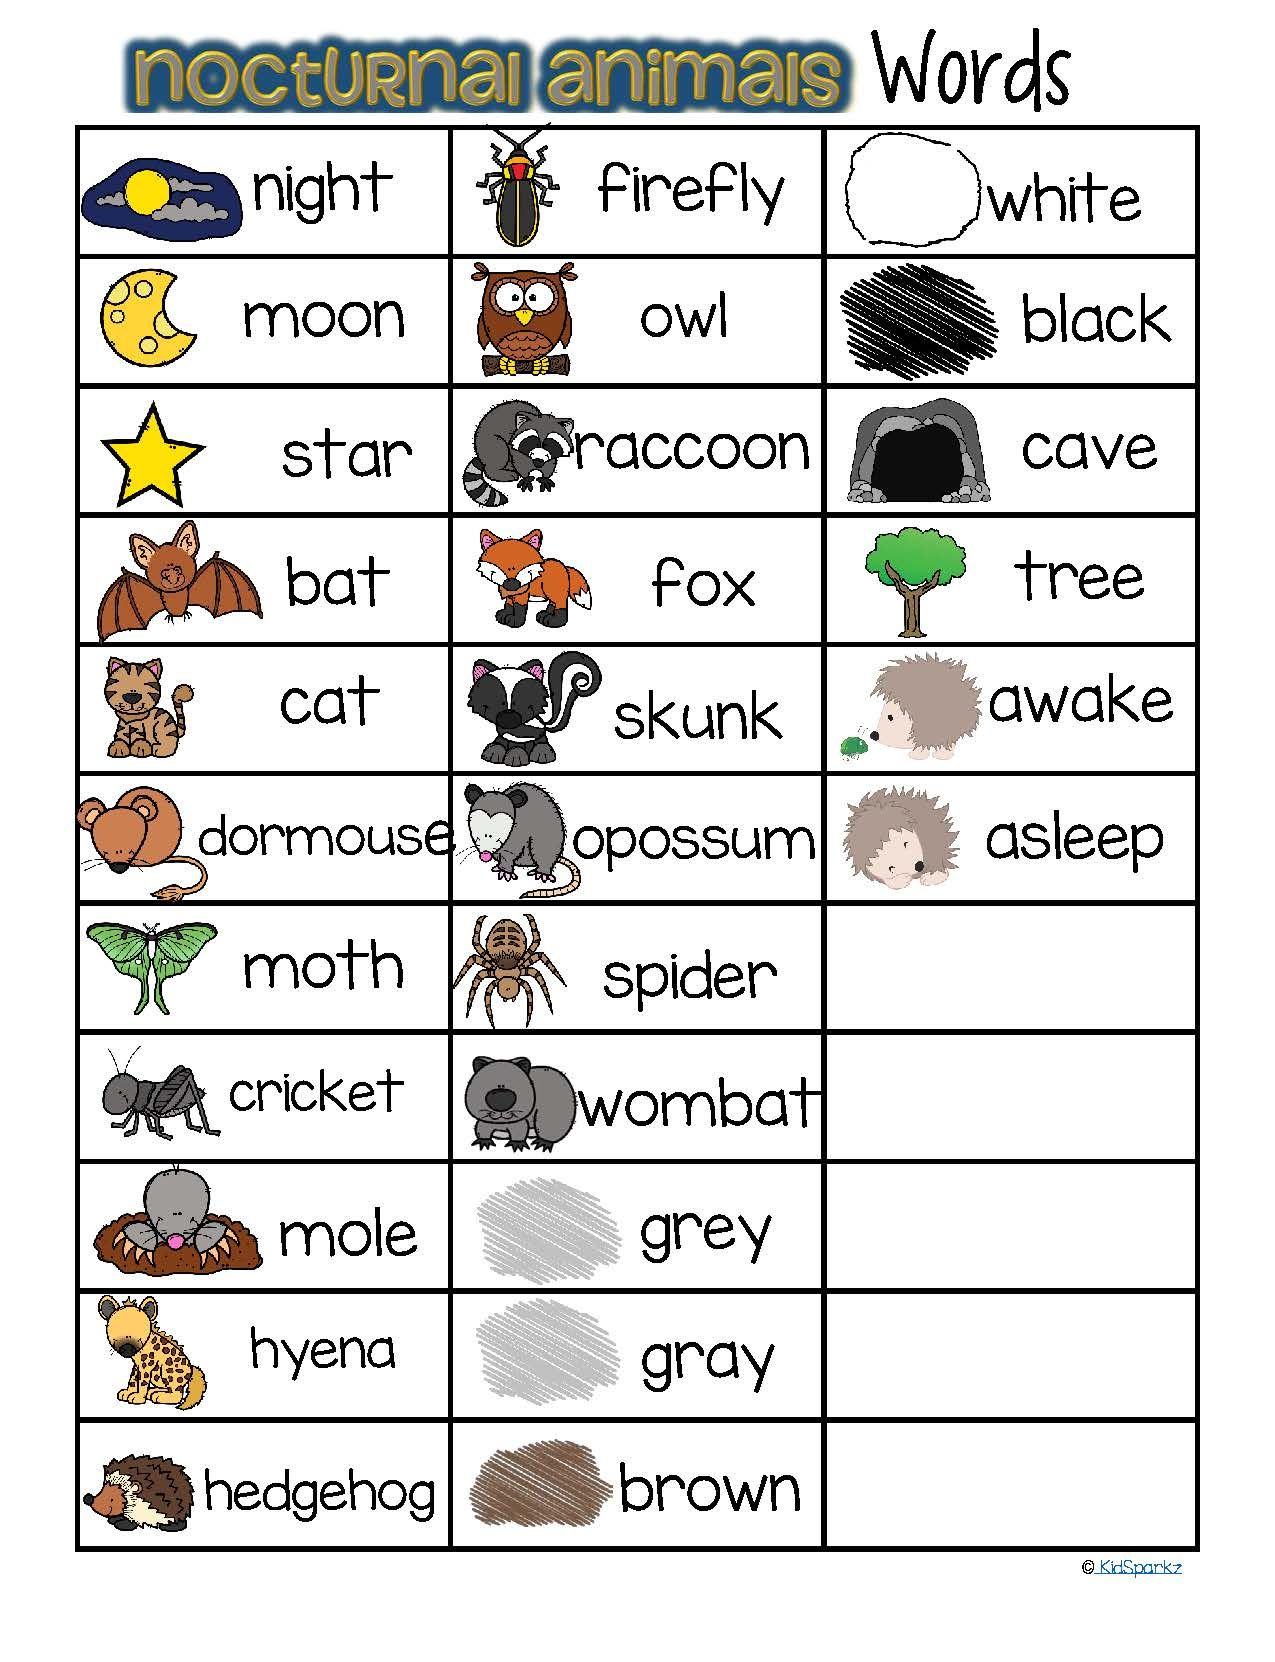 Nocturnal Animals Vocabulary Words List Free | Nocturnal